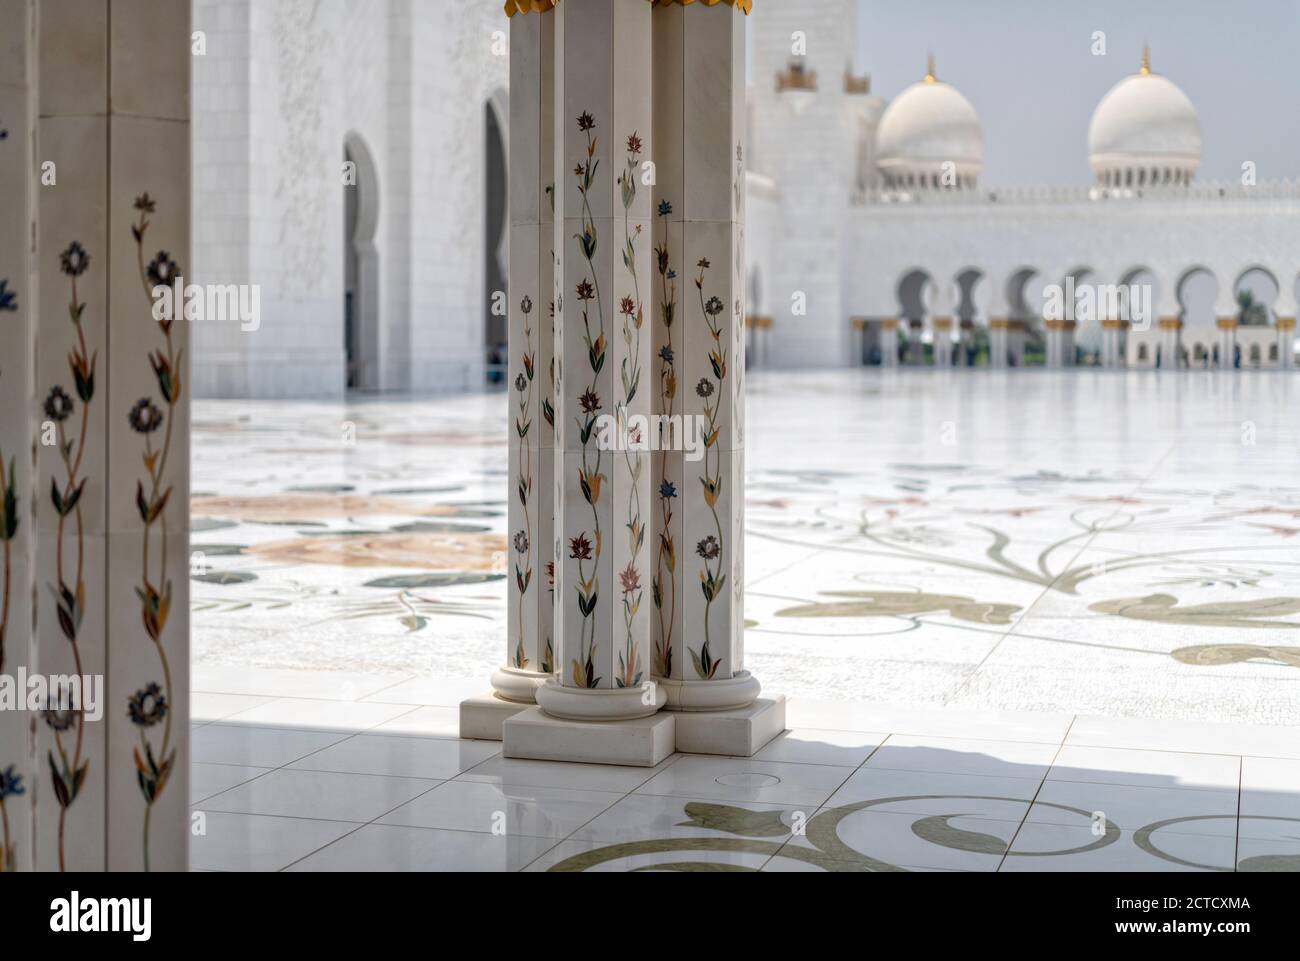 A day shot from the archway inside the Sheikh Zayed Grand Mosque, Abu Dhabi looking into the inner courtyard. Architectural features of marble columns with marble floral design. Mosque completed 2007. Stock Photo